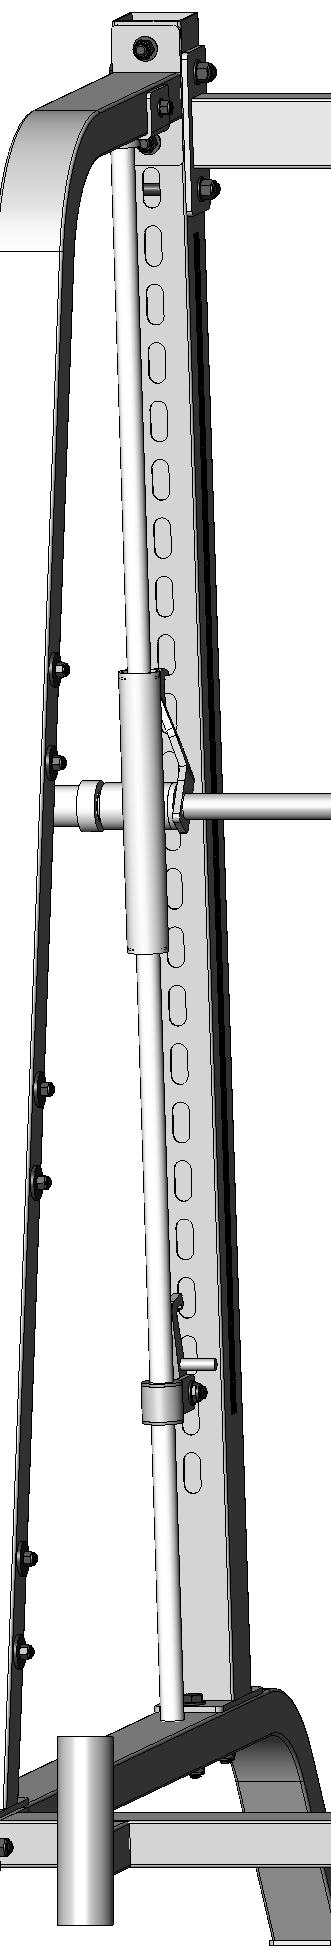 Pay special attention to the Press Bar (#12) making sure both hooks engage uniformly and completely into each locking position.